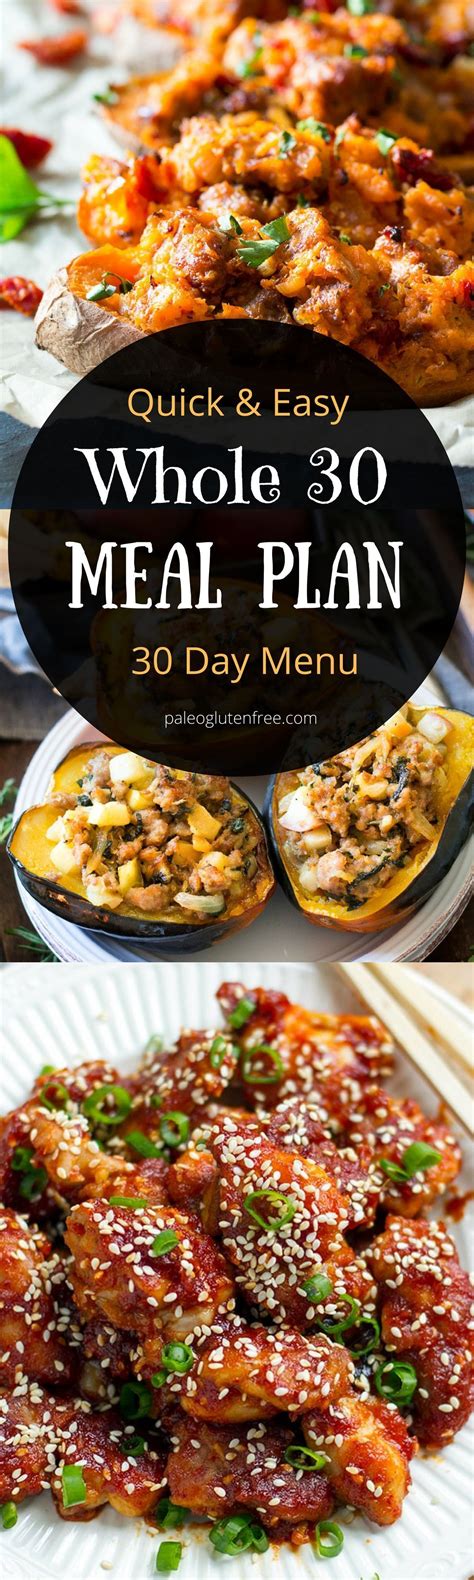 whole30 meal plan that s quick and healthy whole30